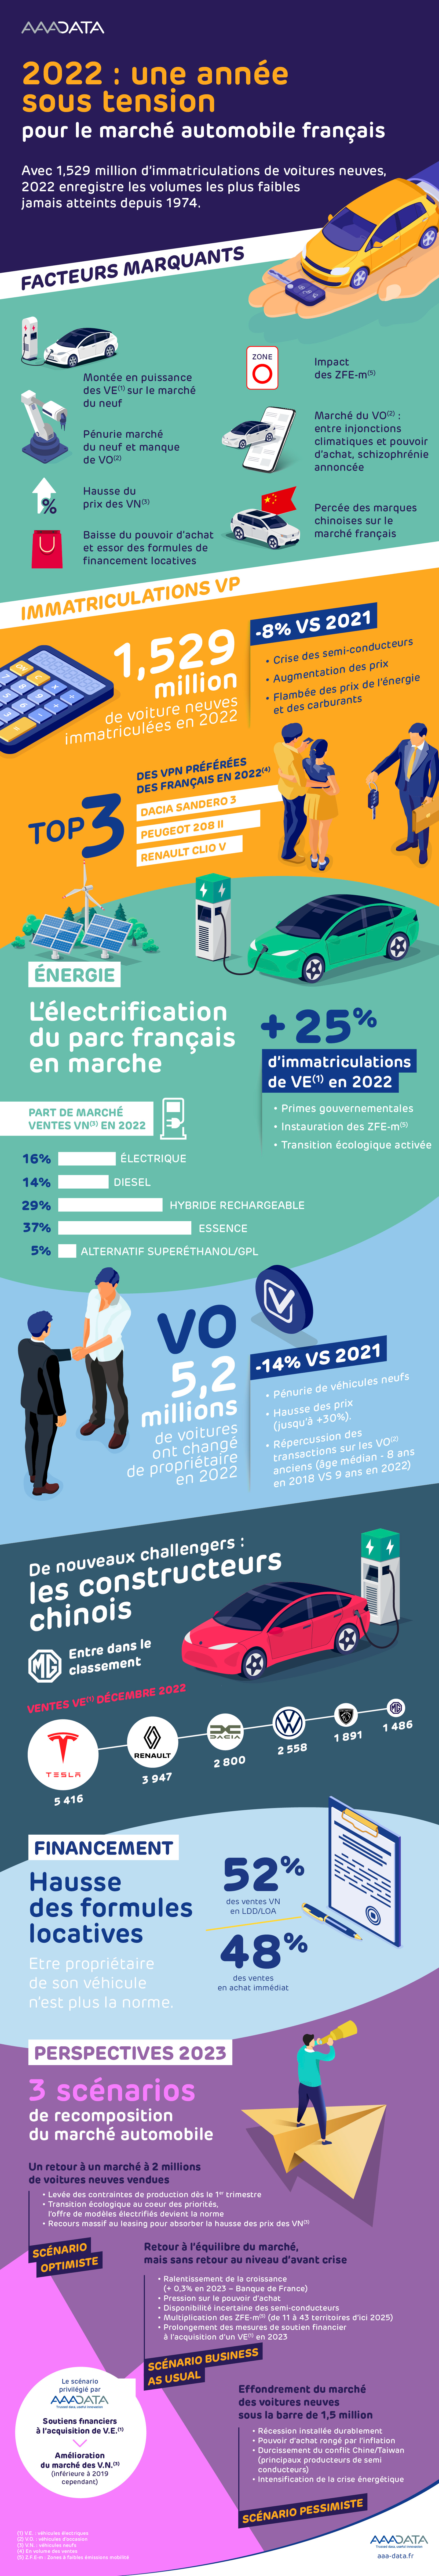 aaadata_infographie_faits-marquants-2022-et-perspectives2023_vf-3